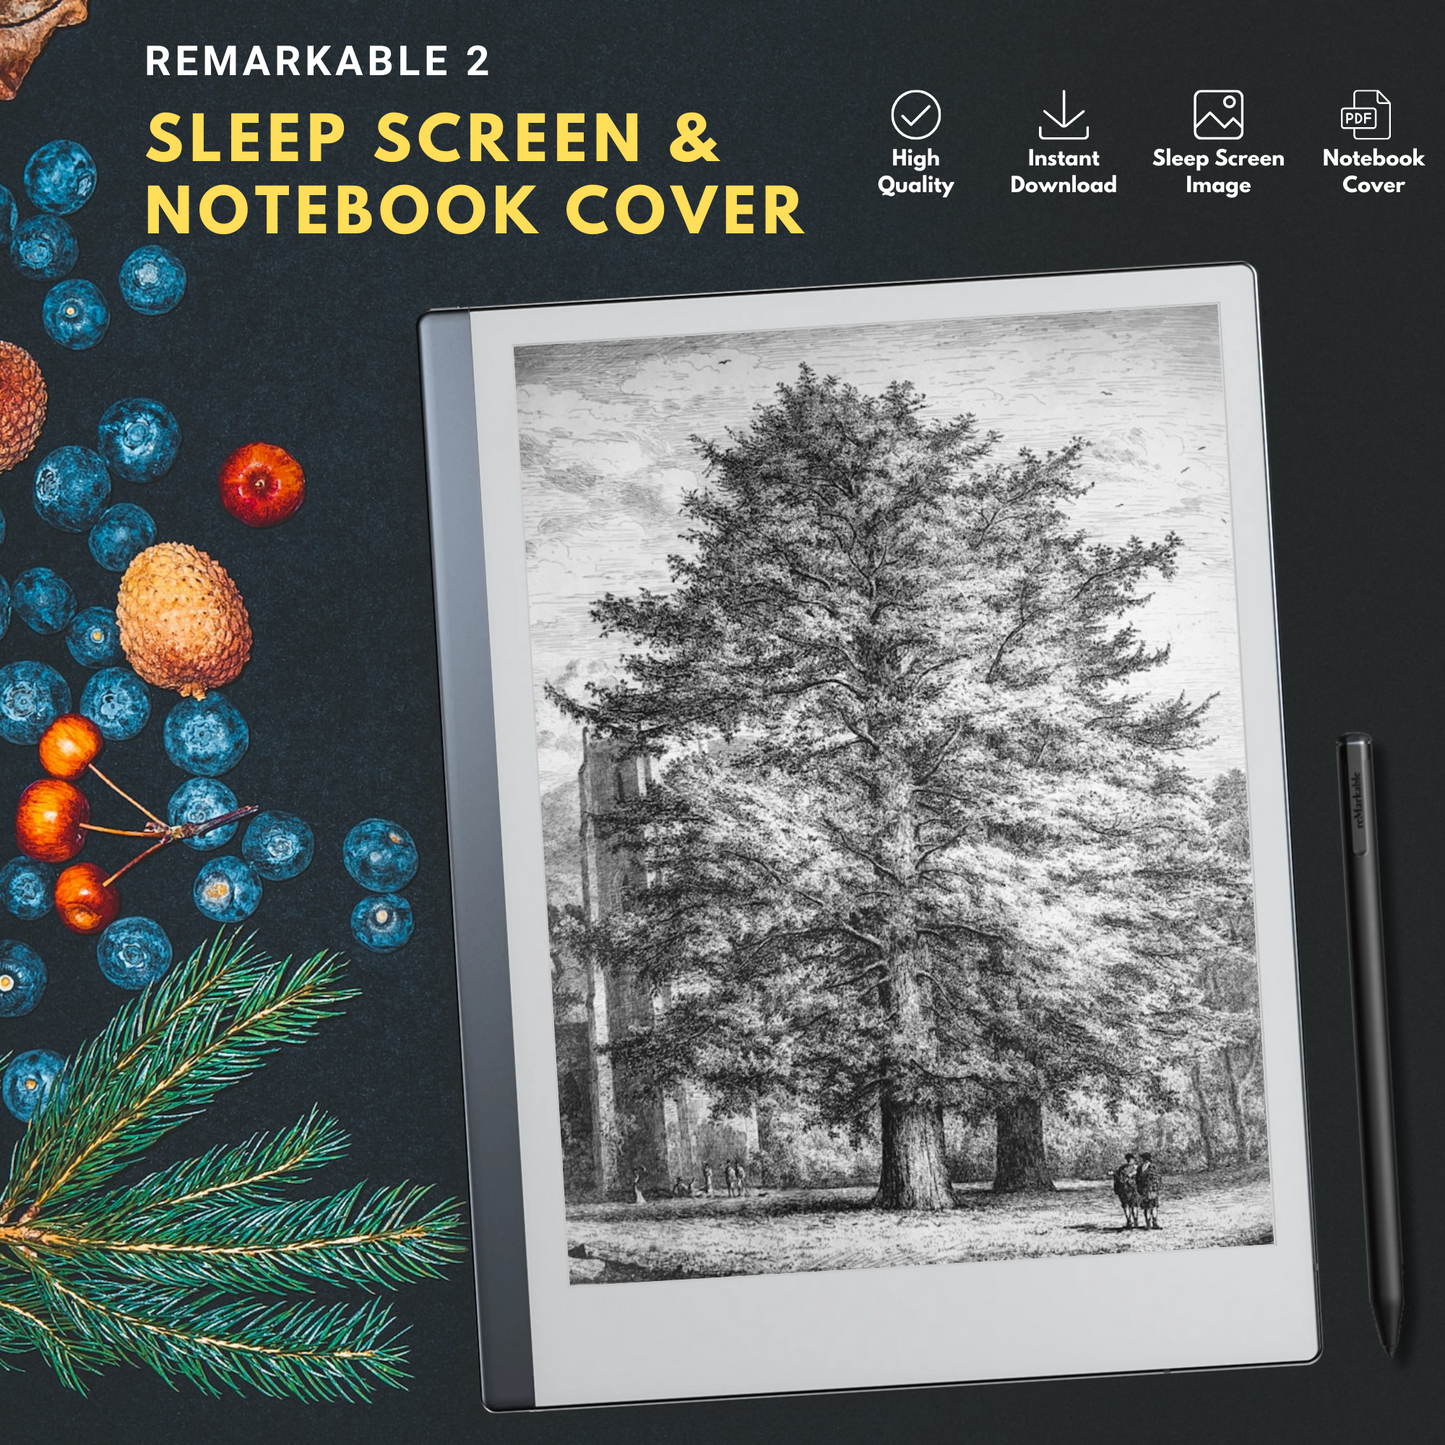 Remarkable 2 Sleep Screen & Notebook Cover Artwork - Artistic Foliage Drawings Created by Hand